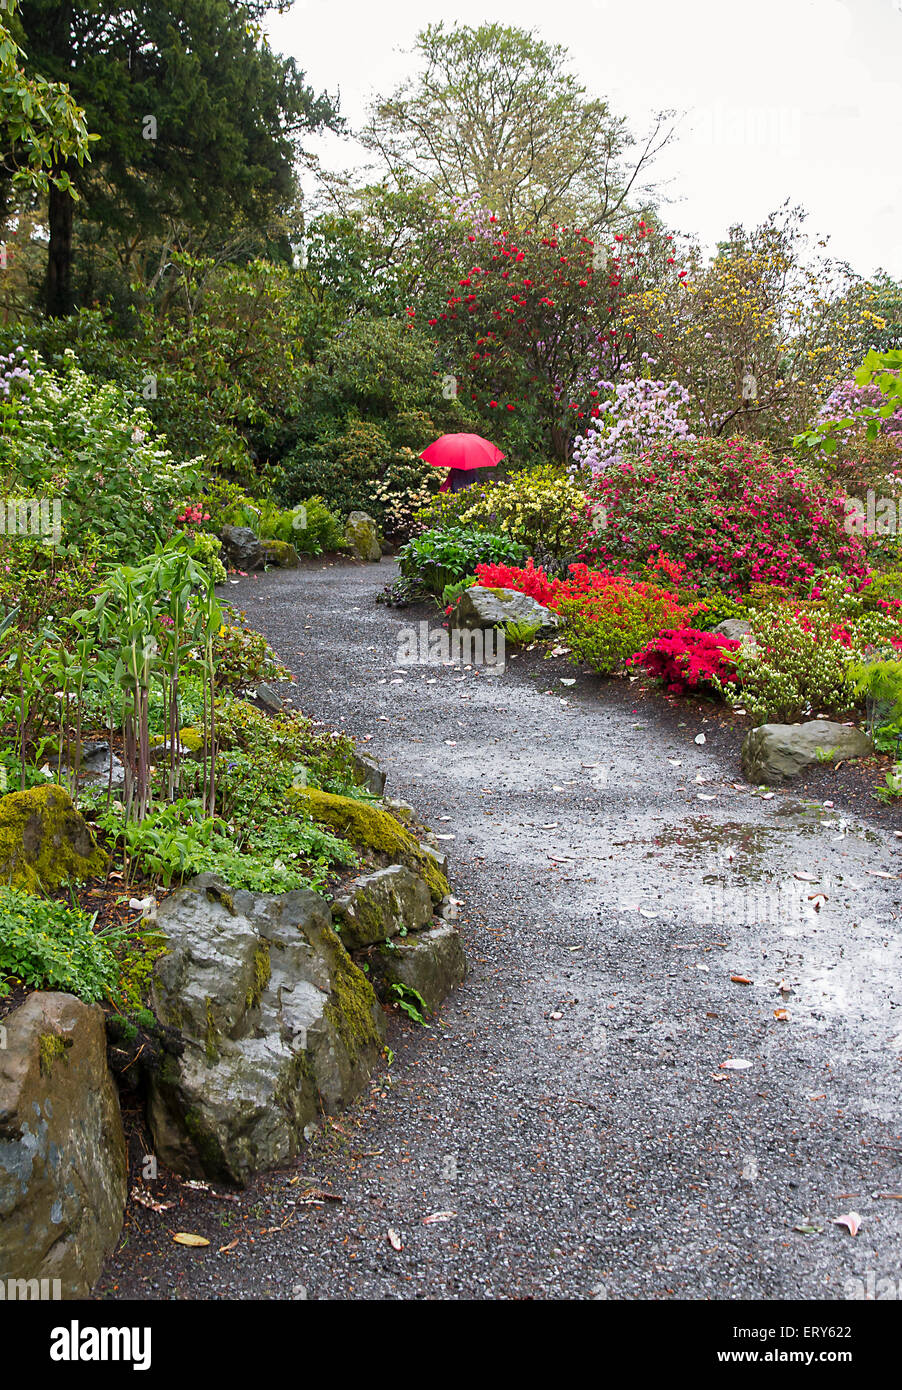 Rain falling on a curving path in an English garden in spring Stock Photo